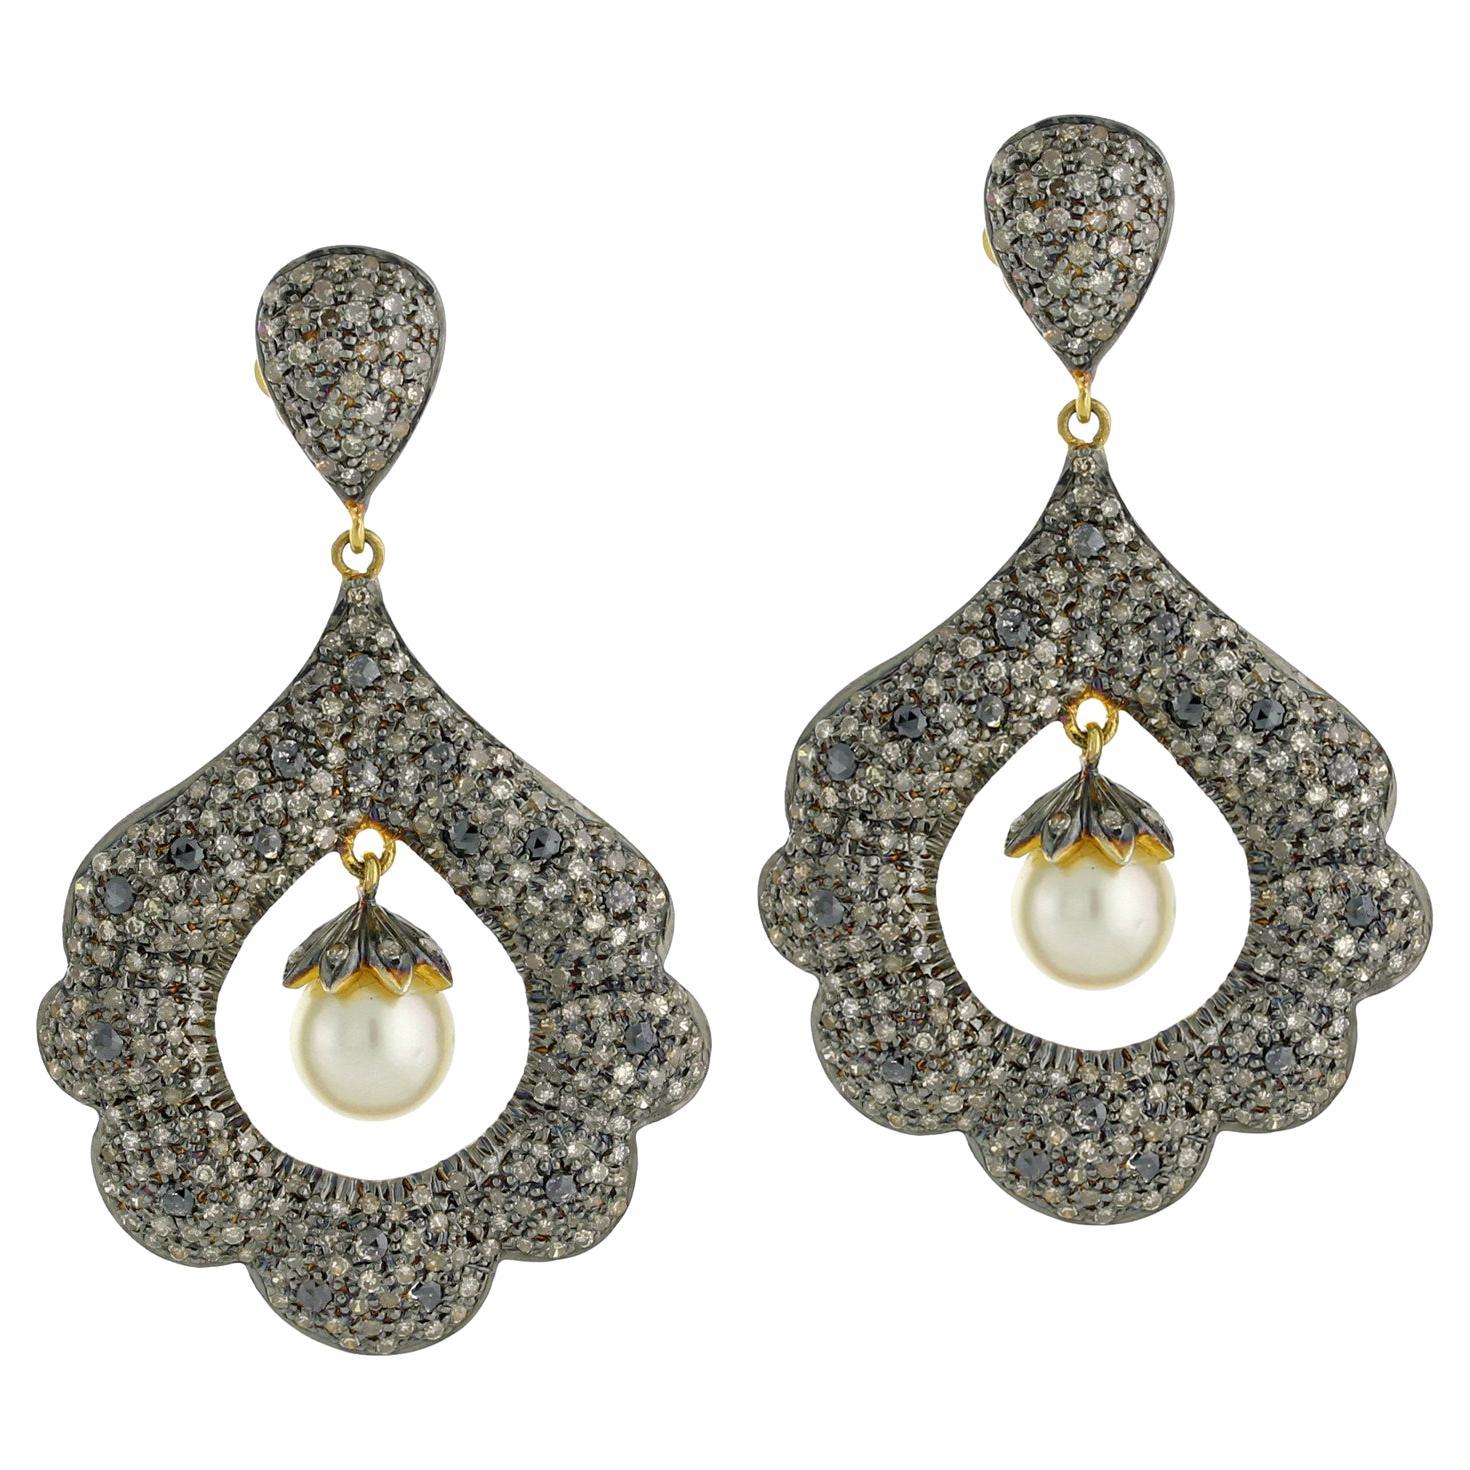 Blossom Shaped Earring with Center Stone Pearl & Pave Diamonds in Gold & Silver